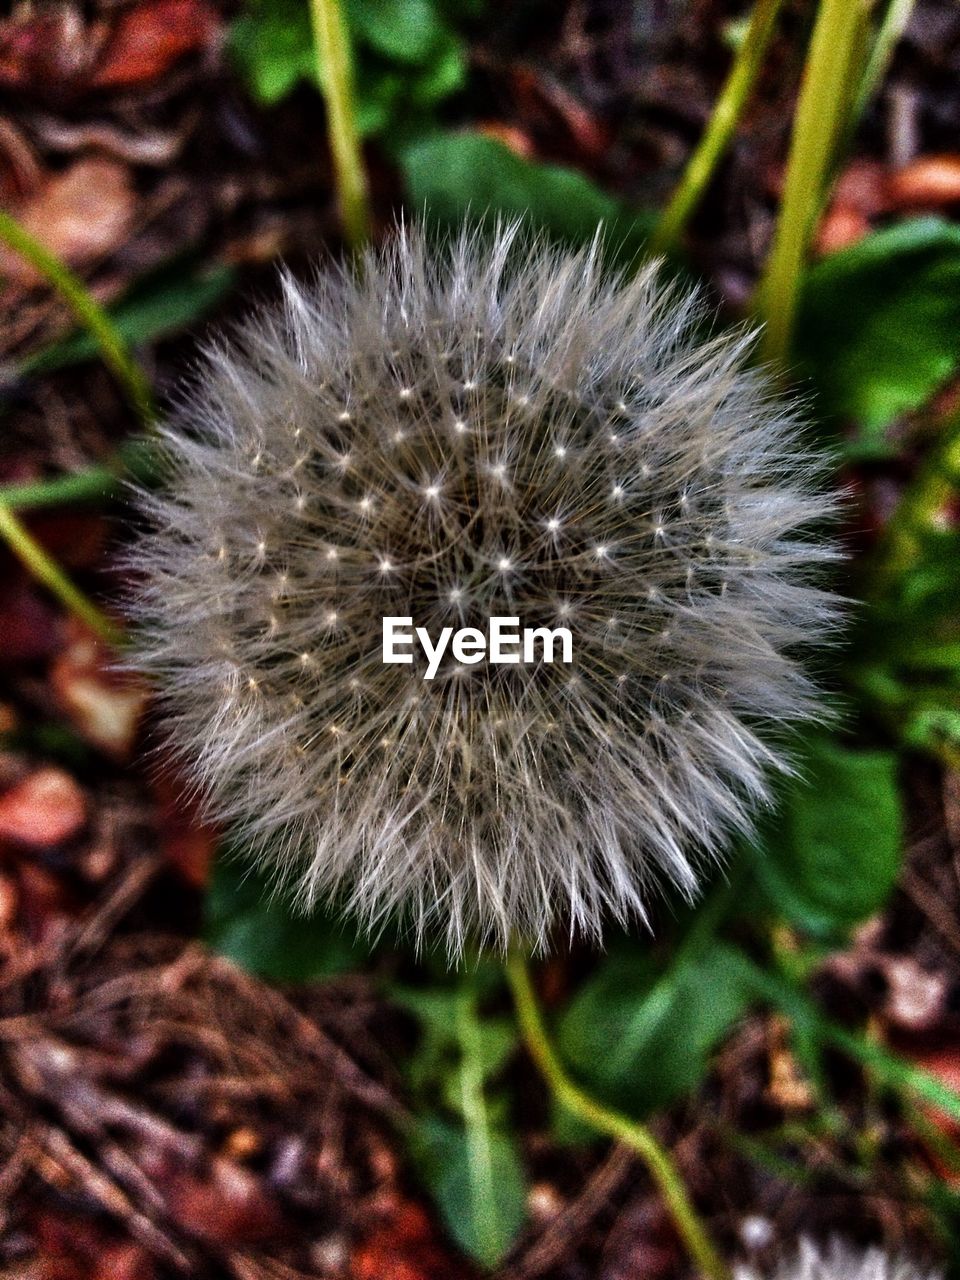 Focused picture of a blossoming dandelion flower head